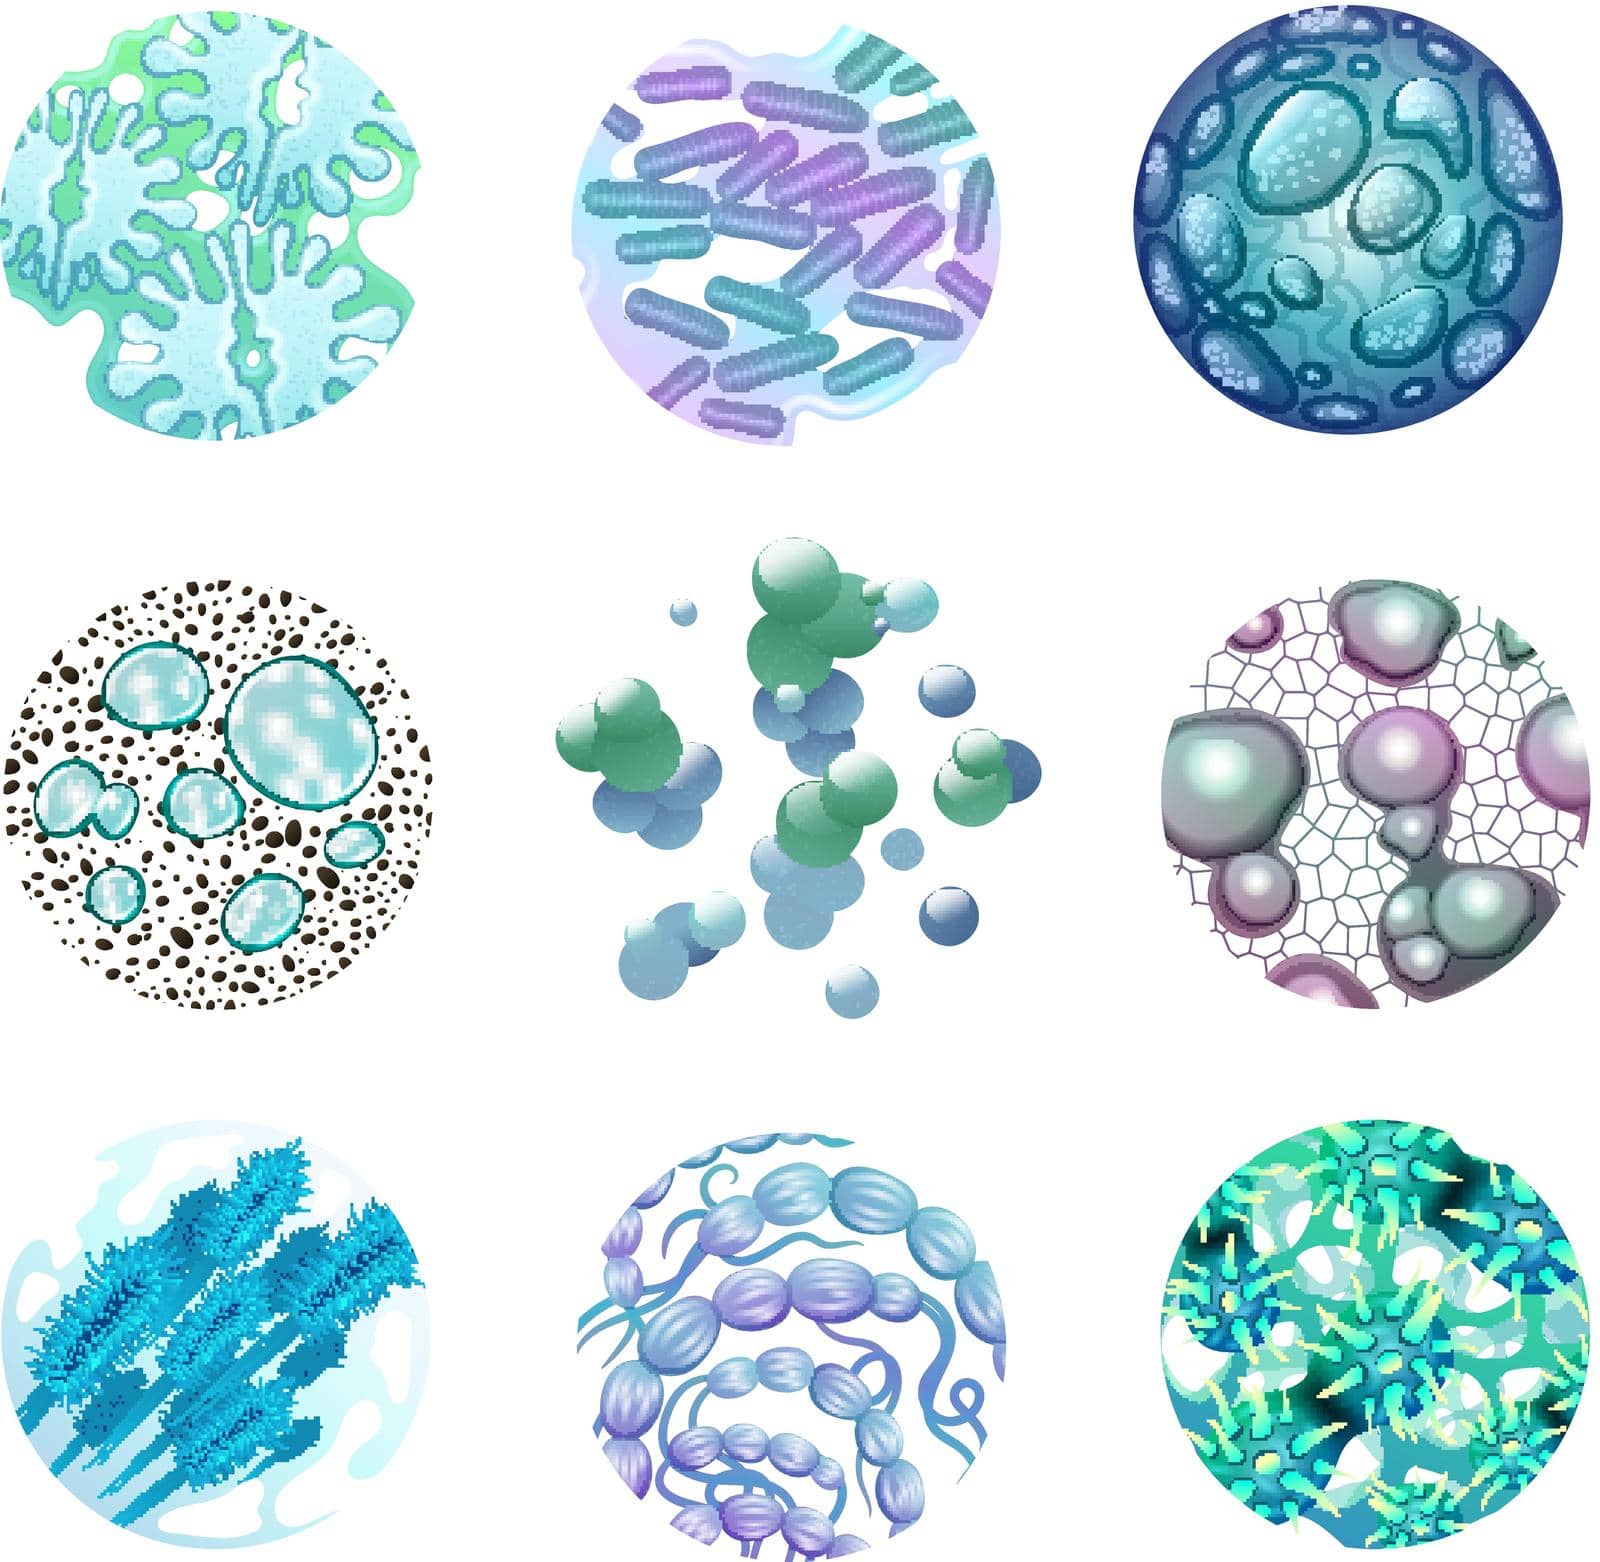 Bacteria round icons set with microbes and viruses realistic isolated vector illustration 